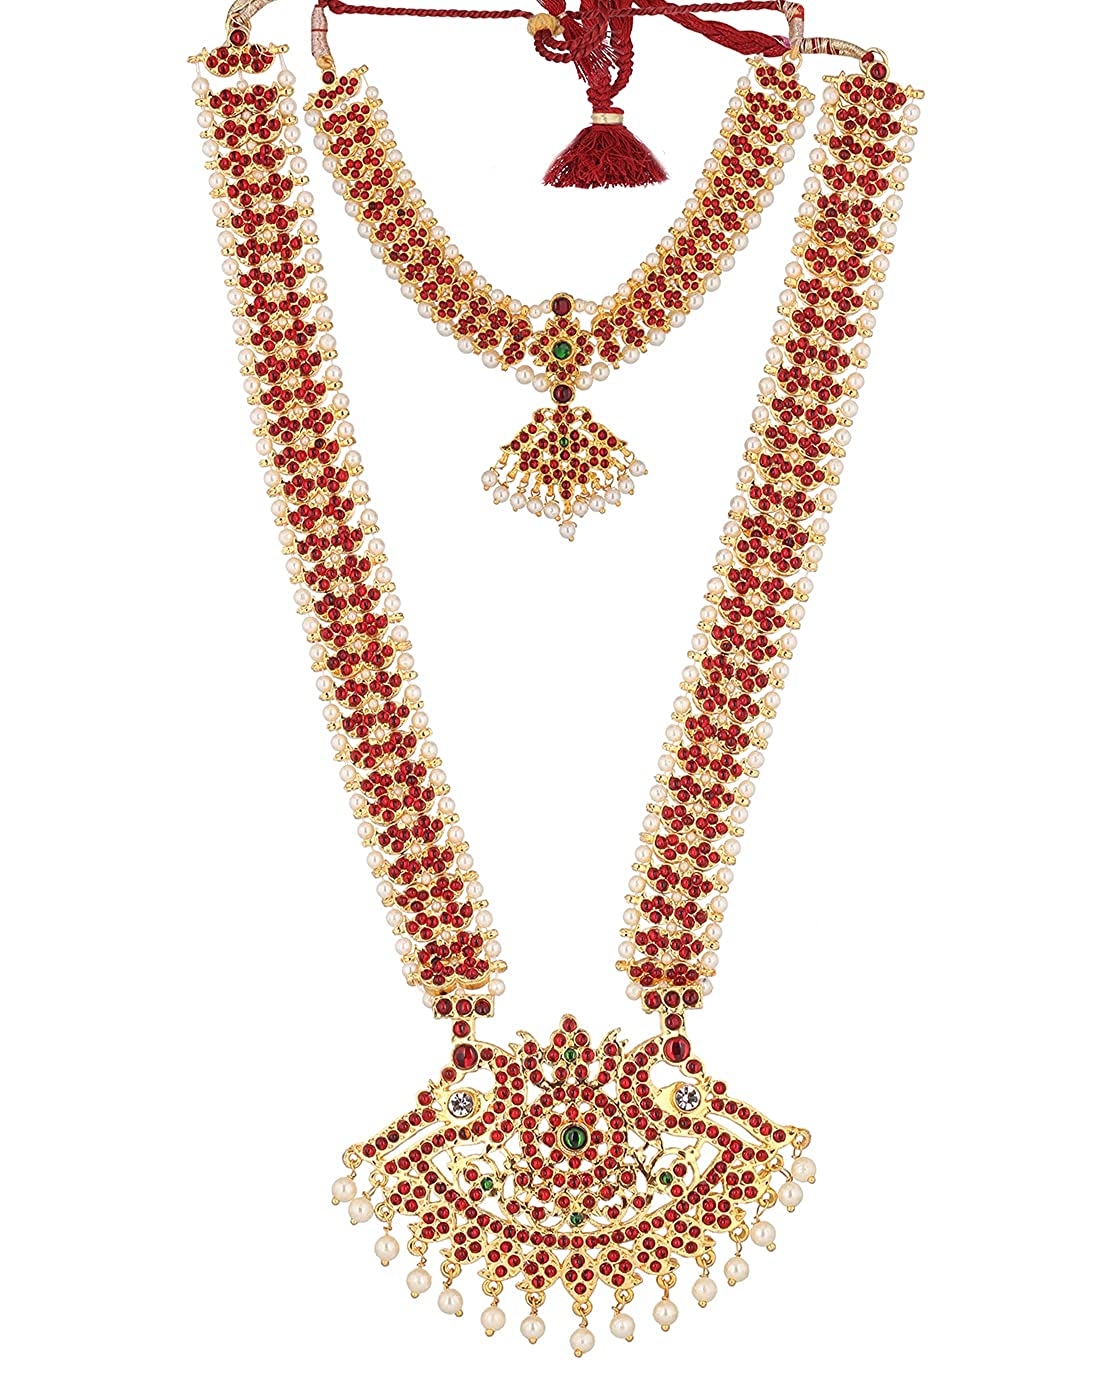 Bharatanatyam temple Classical Dance Necklace Haram golldencollections